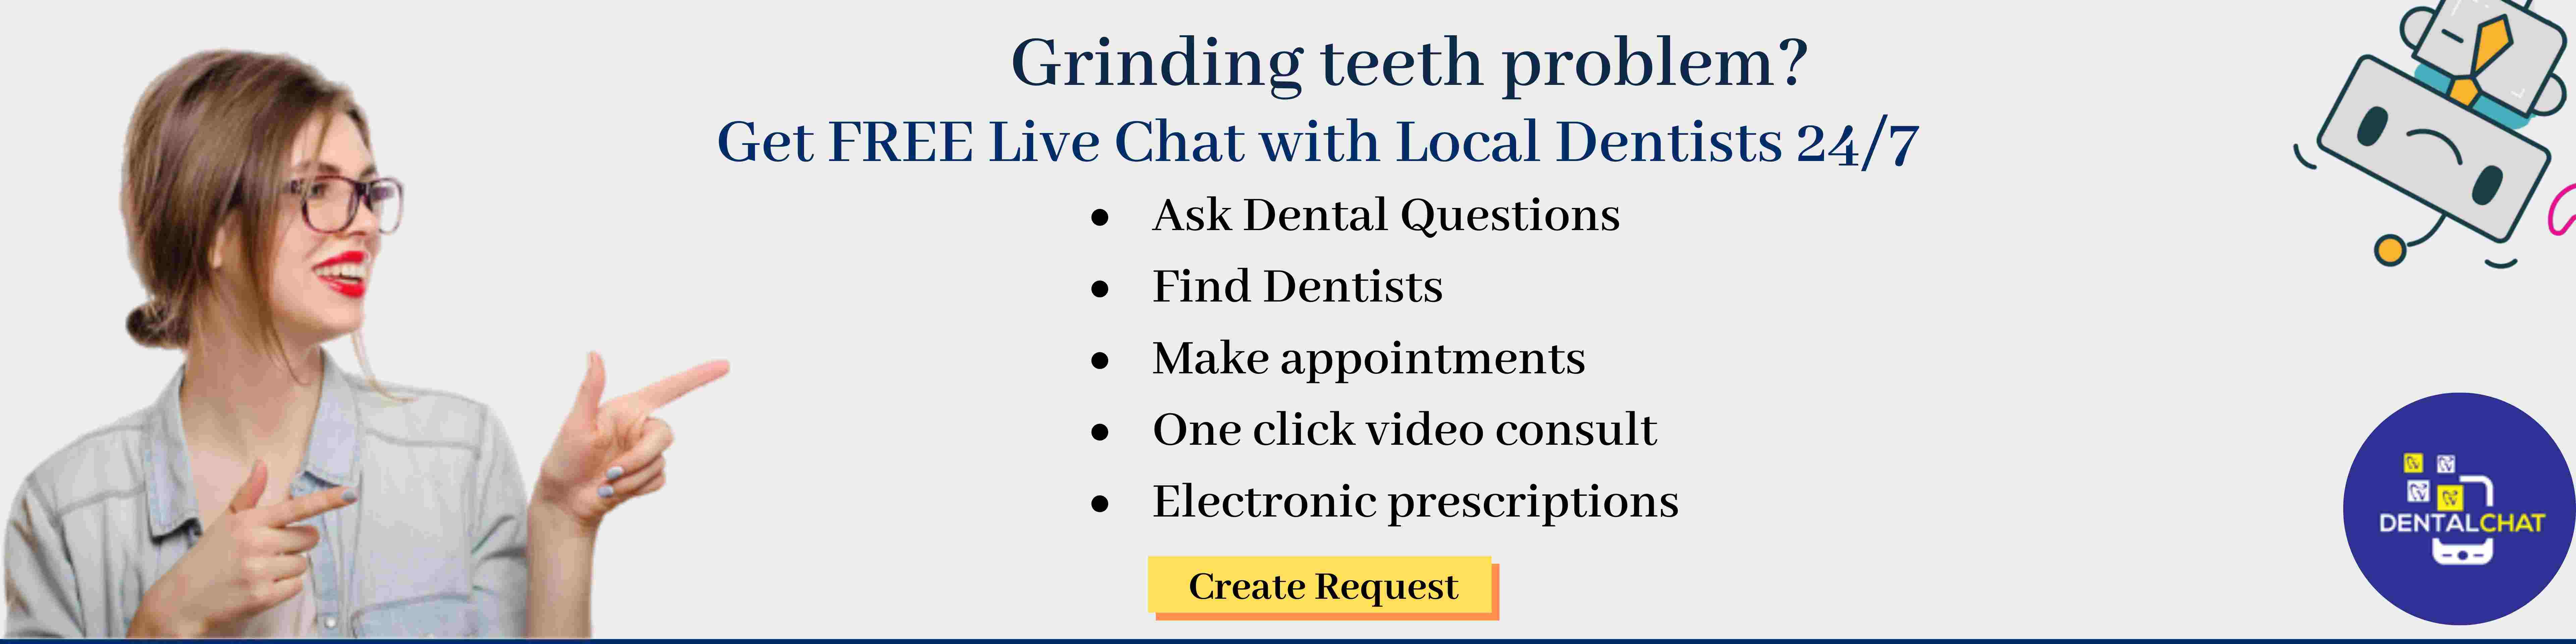 Local teledentistry bruxism question and teledental teeth grinding treatment consult.